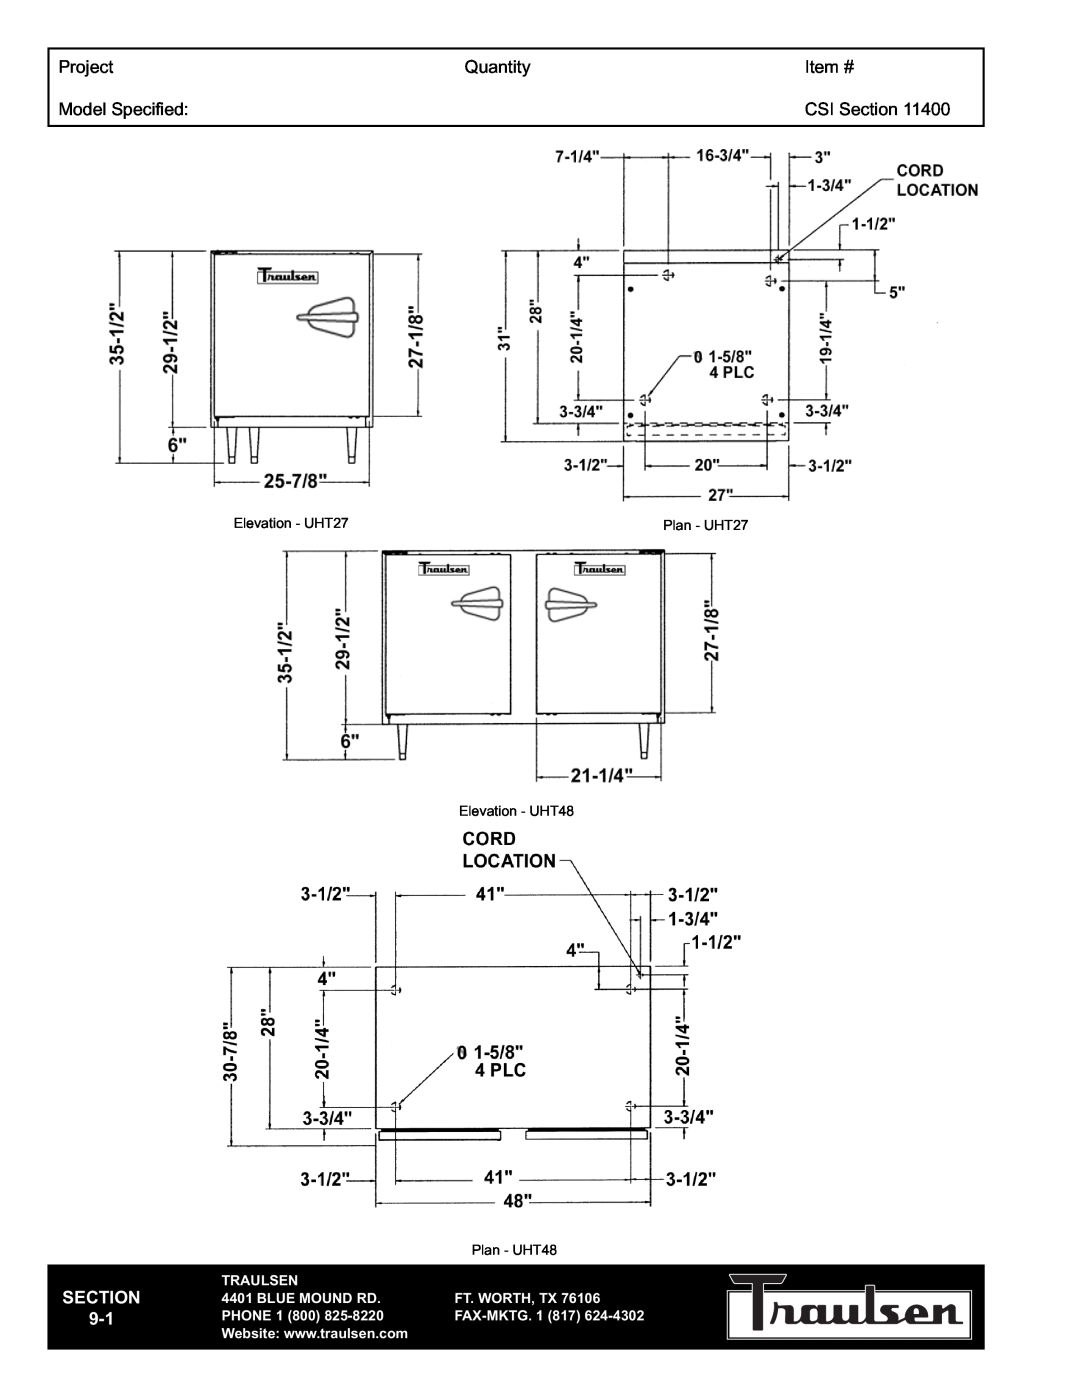 Traulsen UHT27-R Project, Quantity, Item #, Model Specified, CSI Section, Plan - UHT48, Traulsen, Blue Mound Rd, 76106 